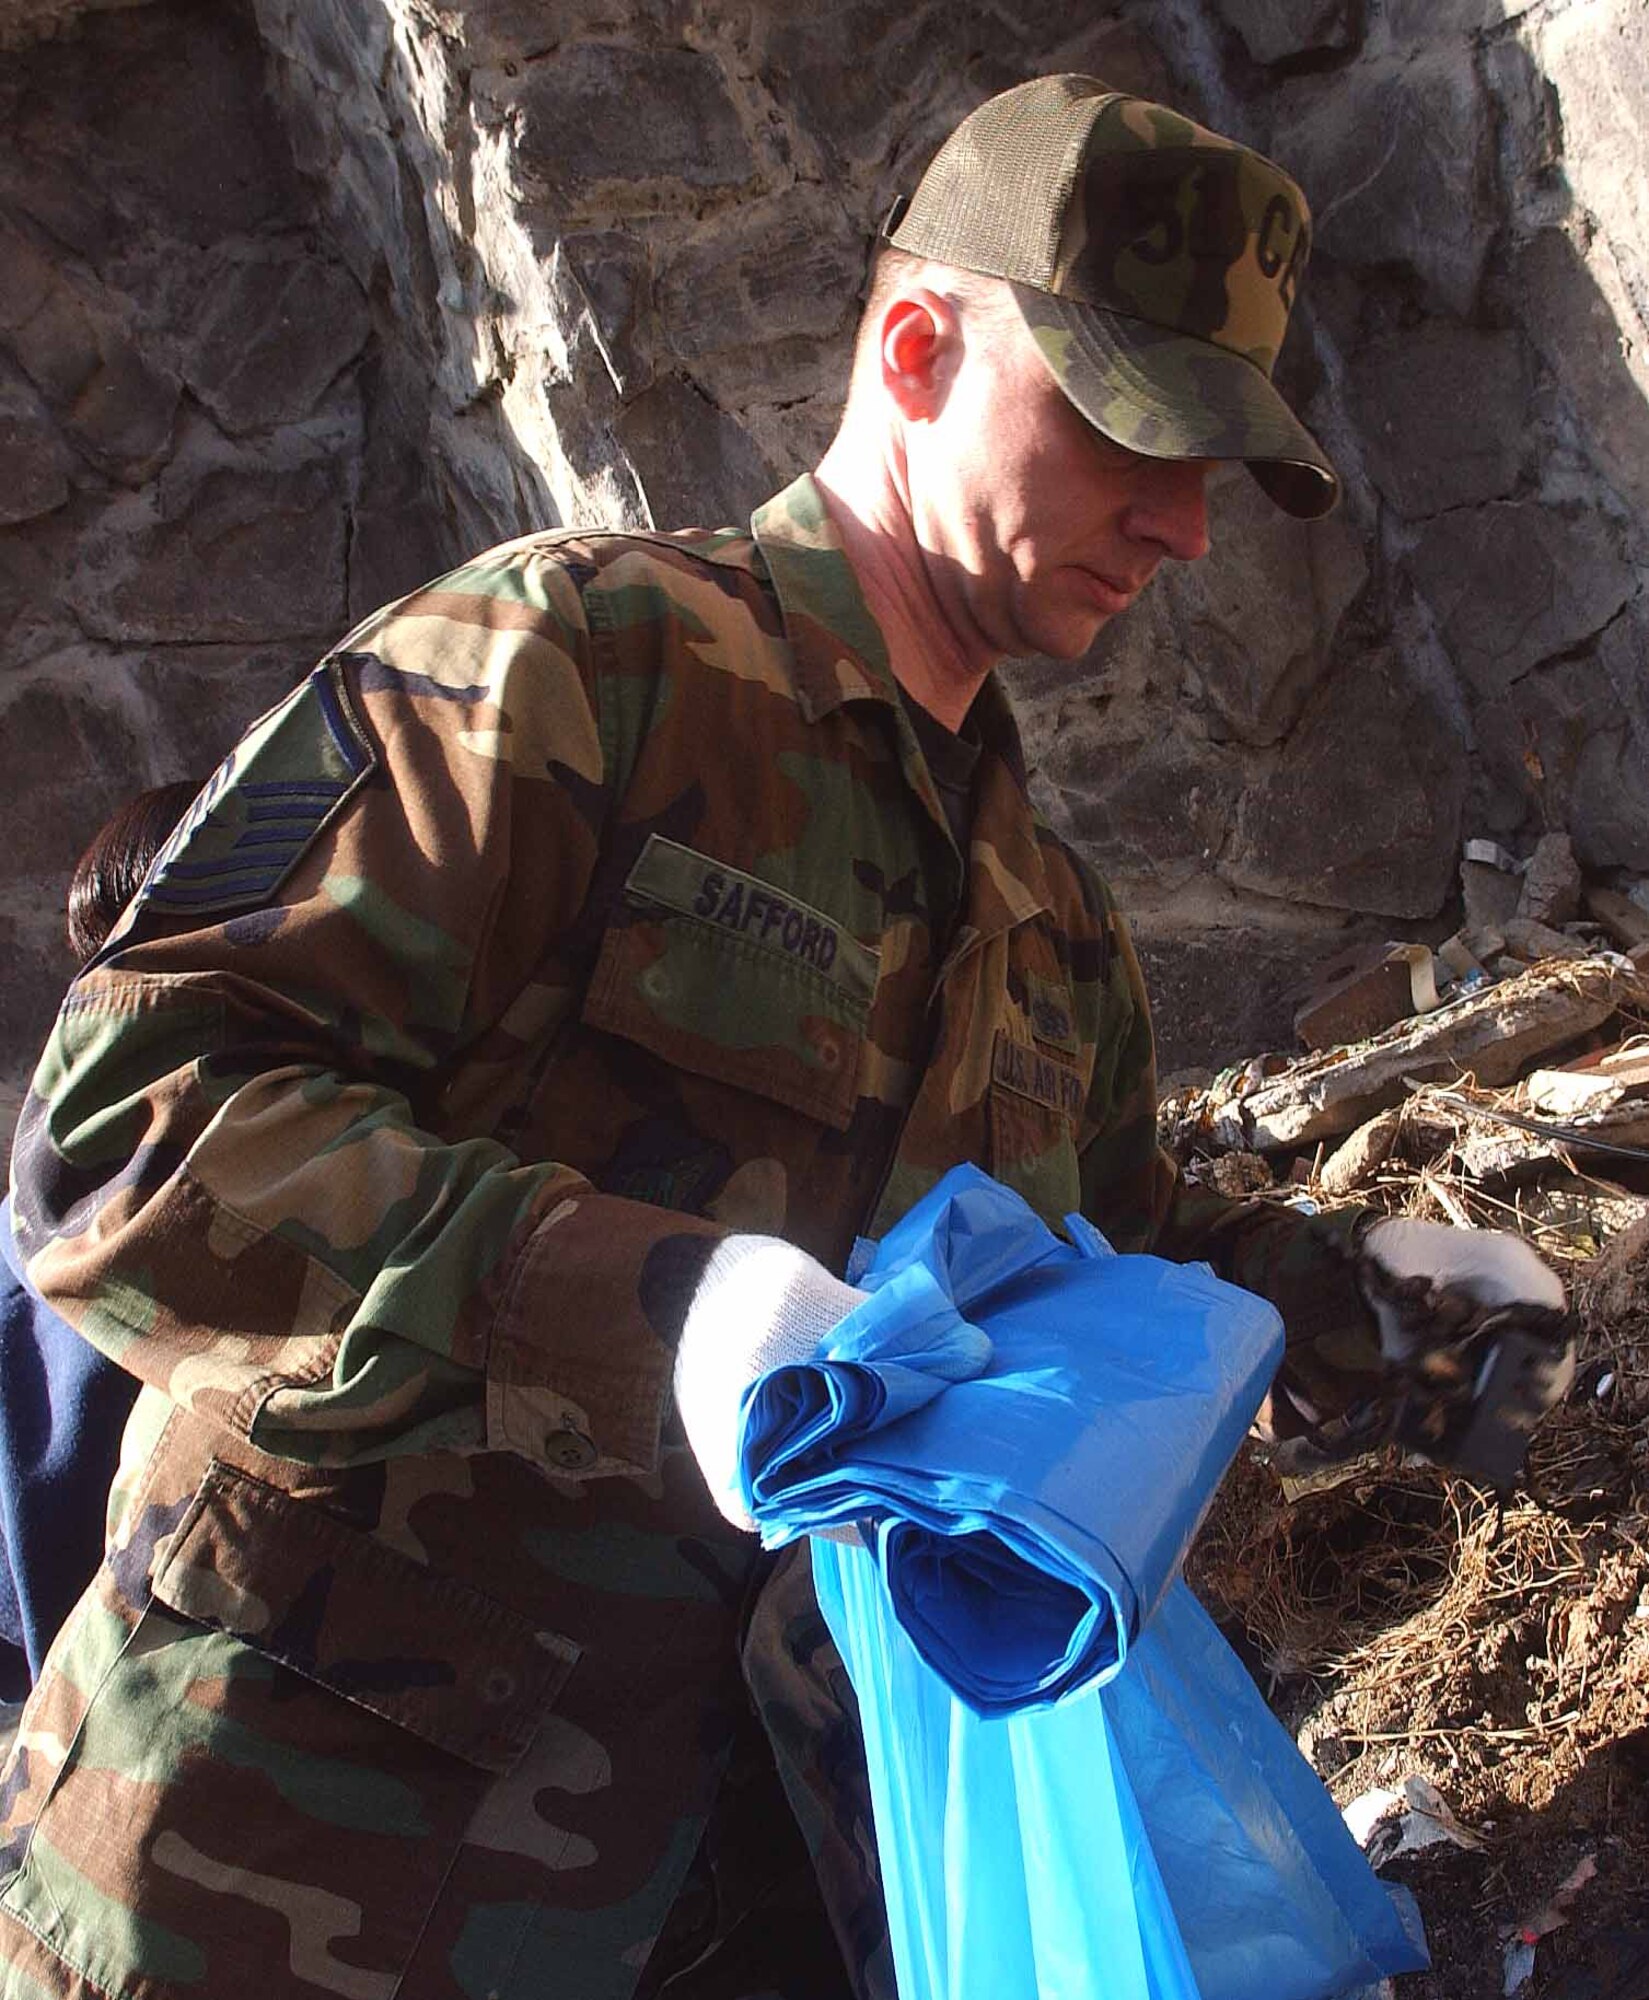 OSAN AIR BASE, Republic of Korea -- Master Sgt. Jeffrey Safford, 51st Civil Engineer Squadron, places litter inside his trash bag during a clean-up of the shopping mall outside the main gate April 3. The clean-up was part of Osan's Earth Day/Arbor Day celebrations. (U.S. Air Force photo/Staff Sgt. Candy Knight)